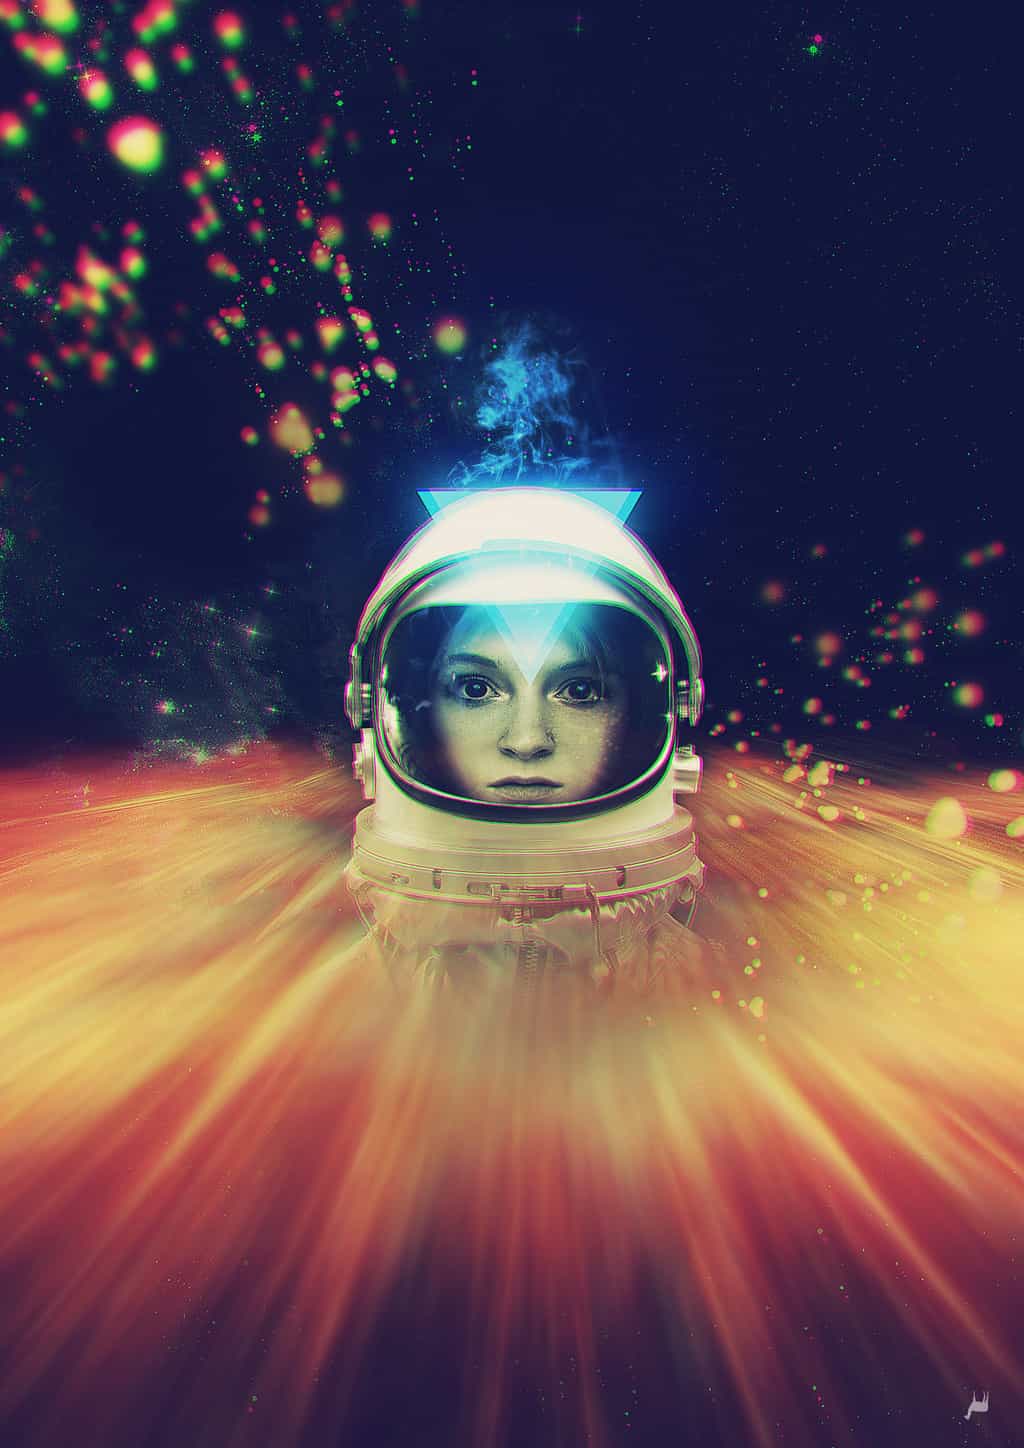 Illustration of women in space by Voila Vala